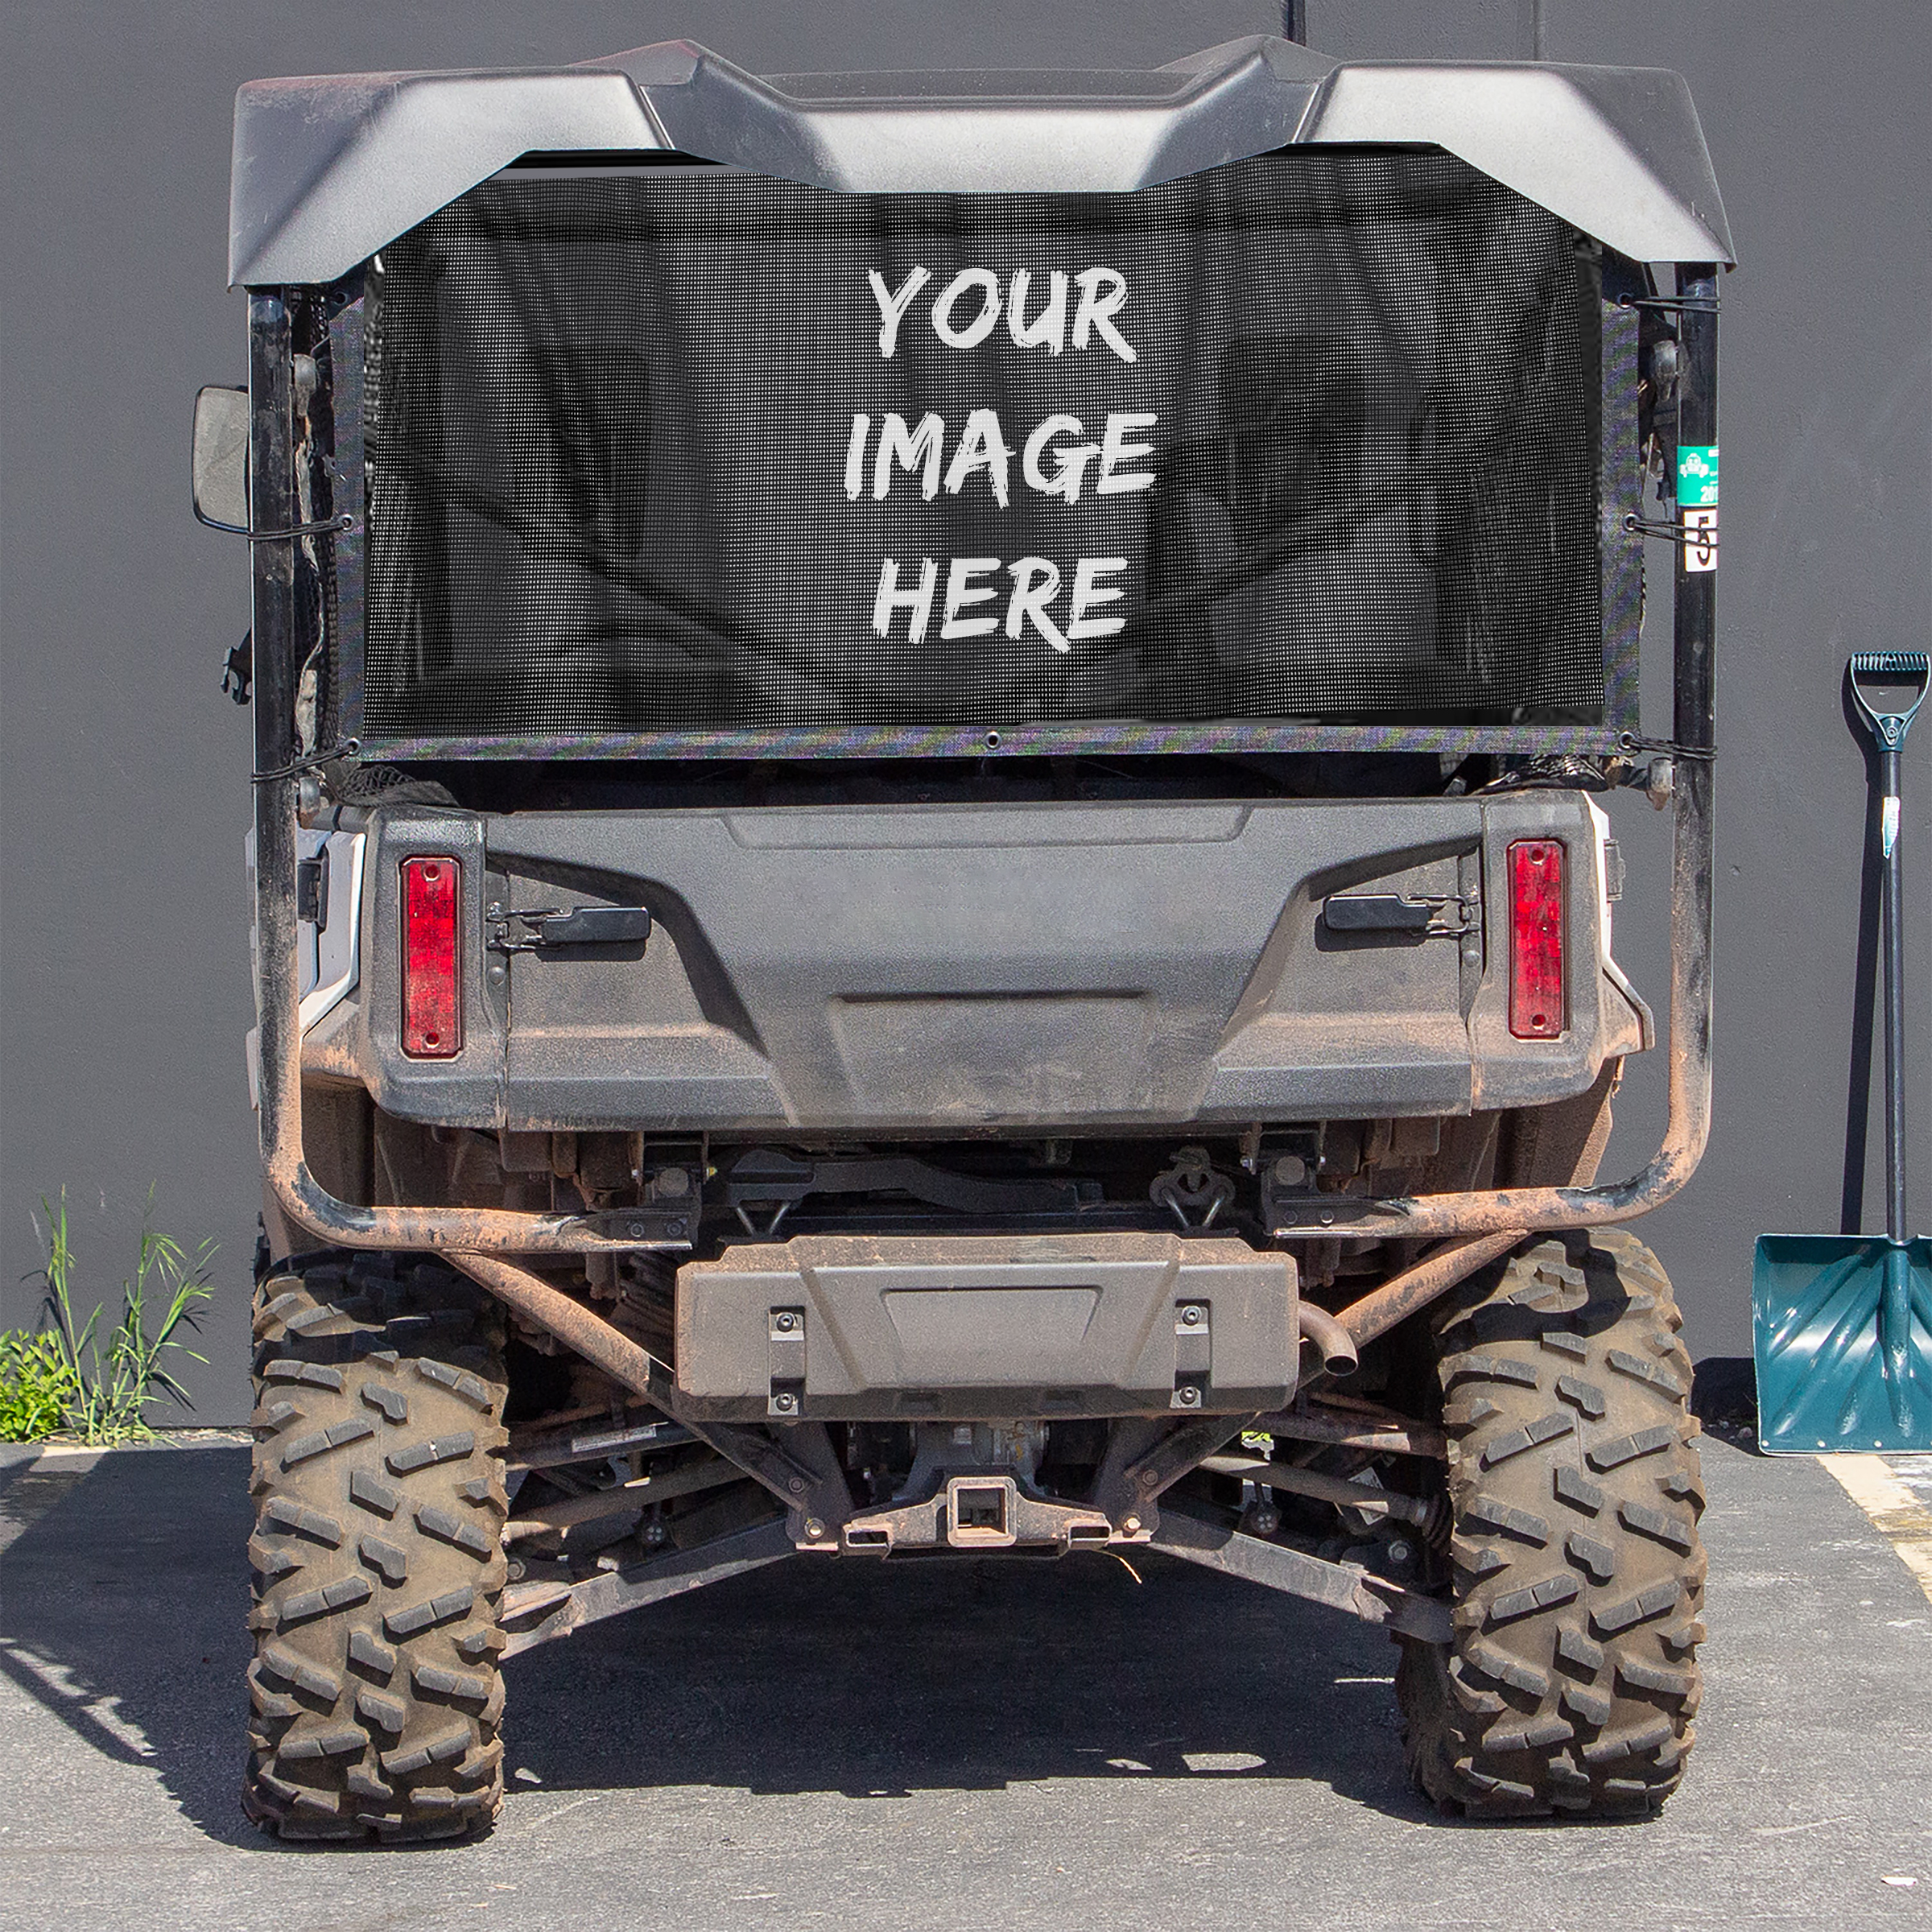 Rear view of an off-road vehicle with a UTV/Side by Side Rear Dust Screen-CUSTOM IMAGE on the spare tire cover.